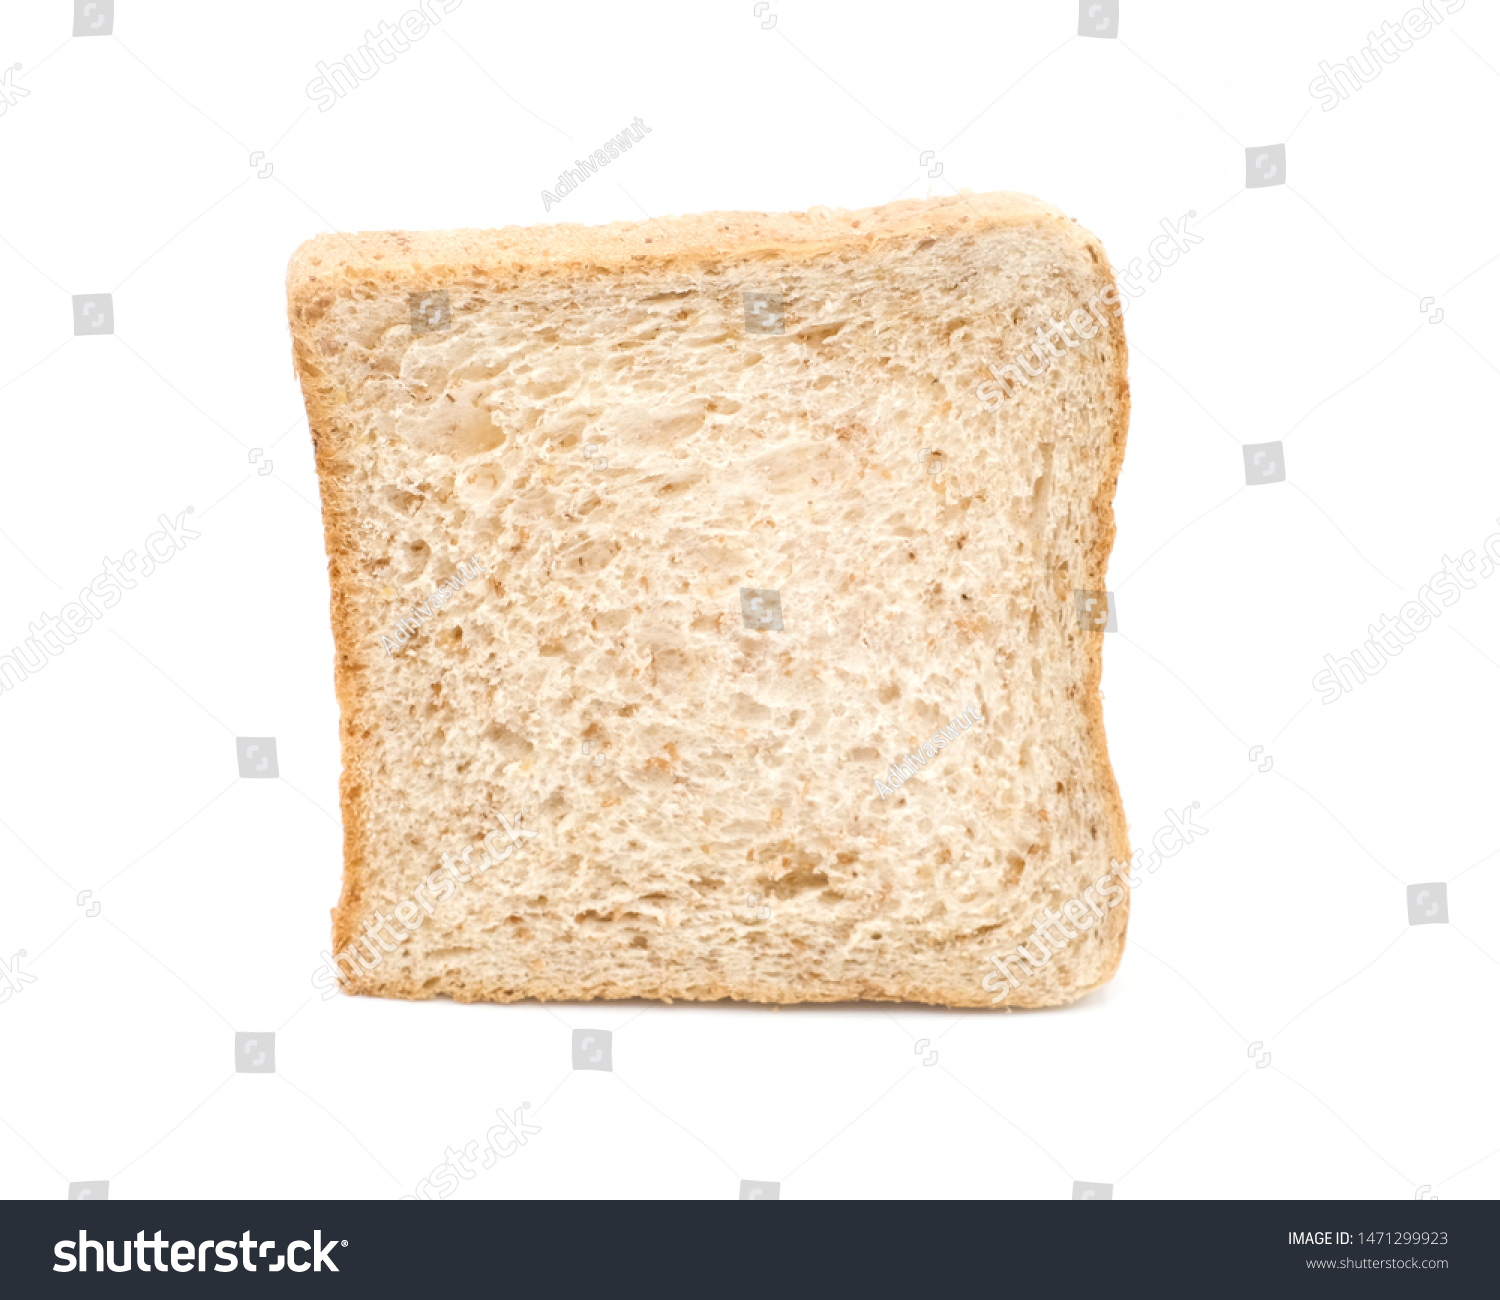 Whole Grain Bread isolated on white background, Breakfast with whole Grain Bread, Closeup whole grain bread #1471299923